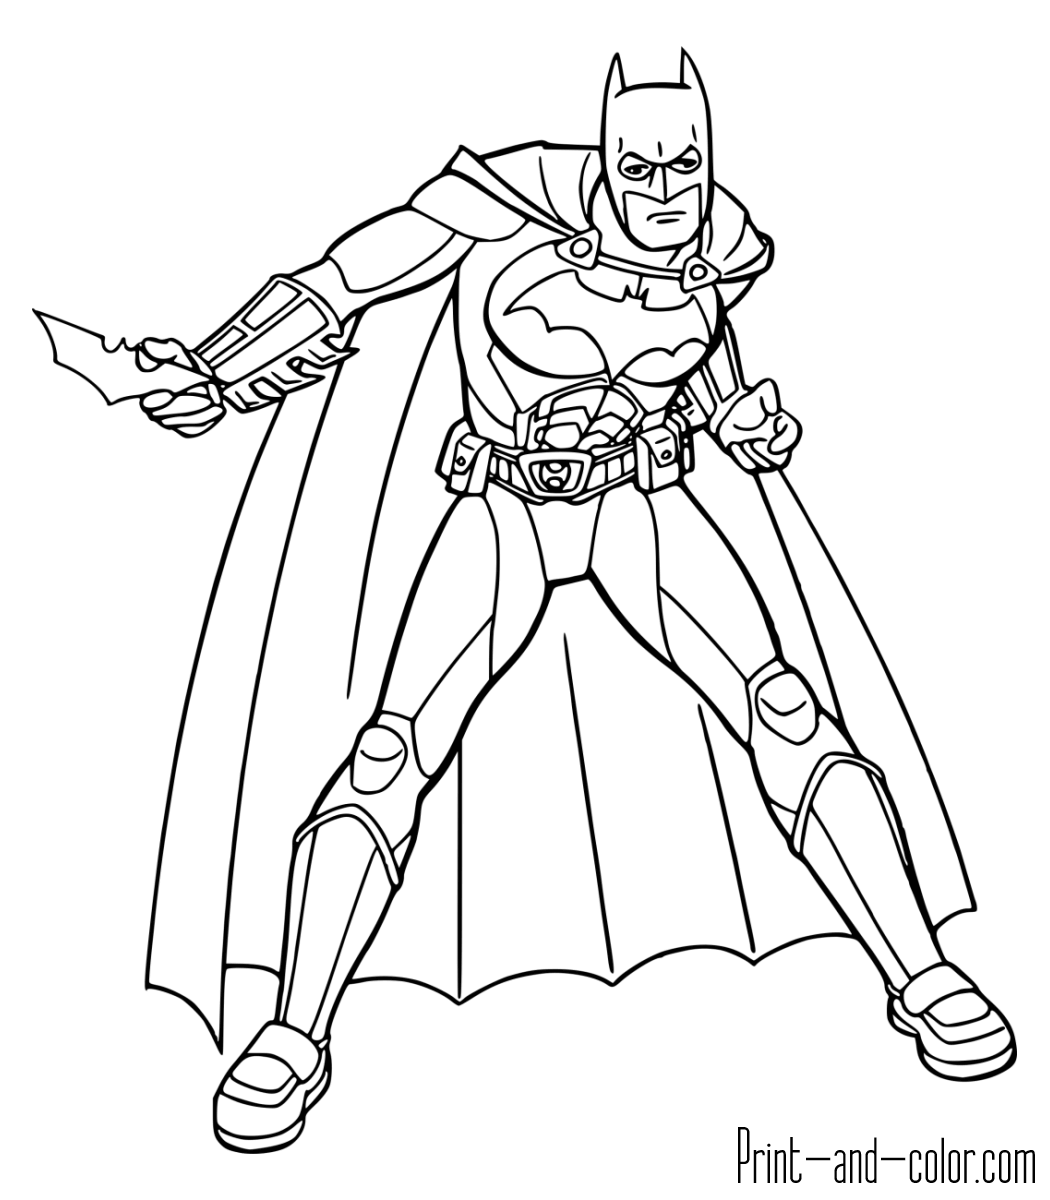 colouring pictures of batman welcome to miss priss mickey mouse batman coloring pages of pictures batman colouring 